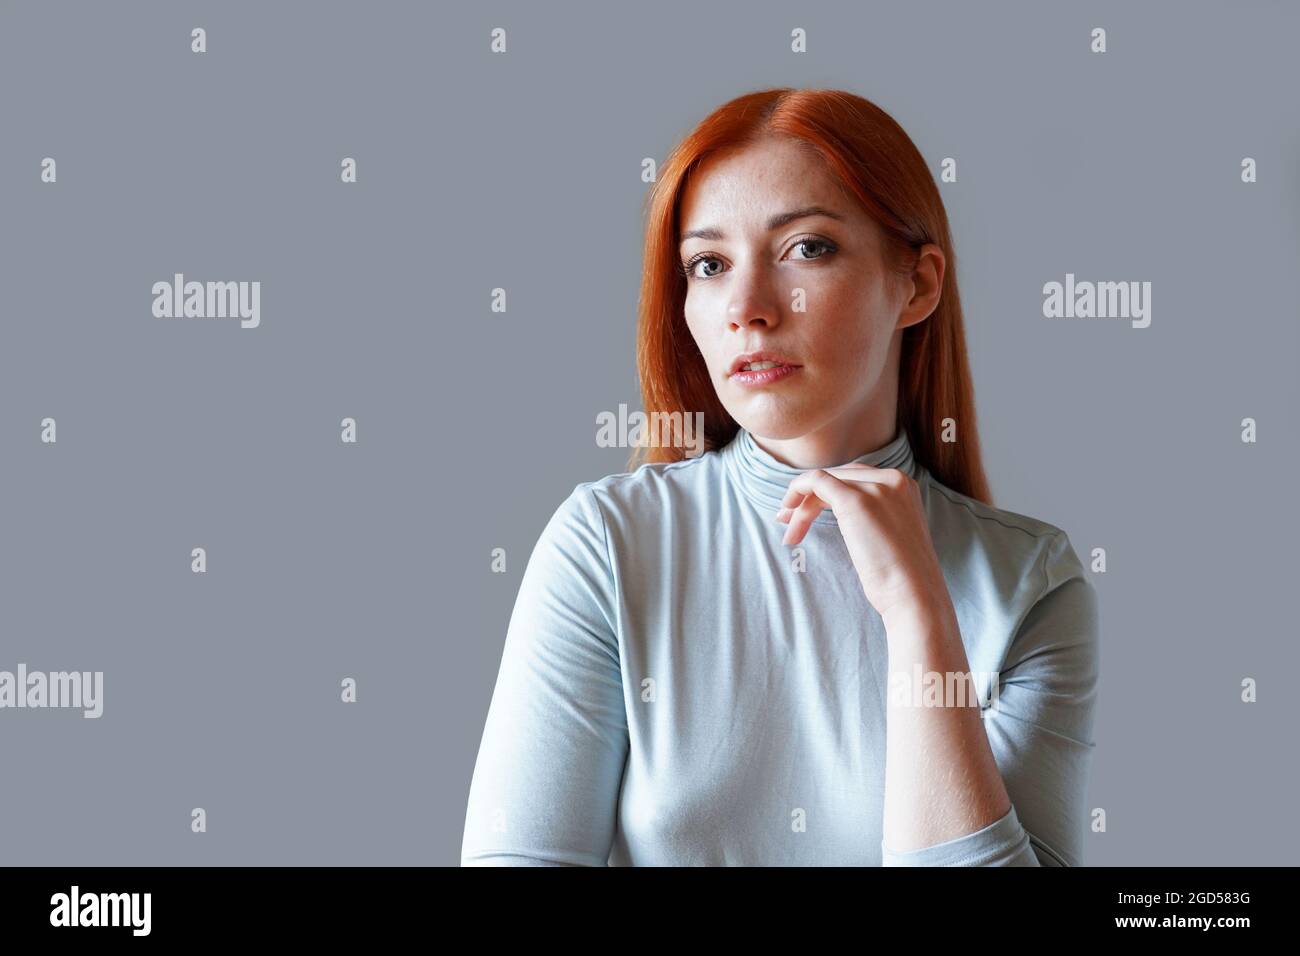 contemplative young woman with long red hair and light blue turtleneck Stock Photo